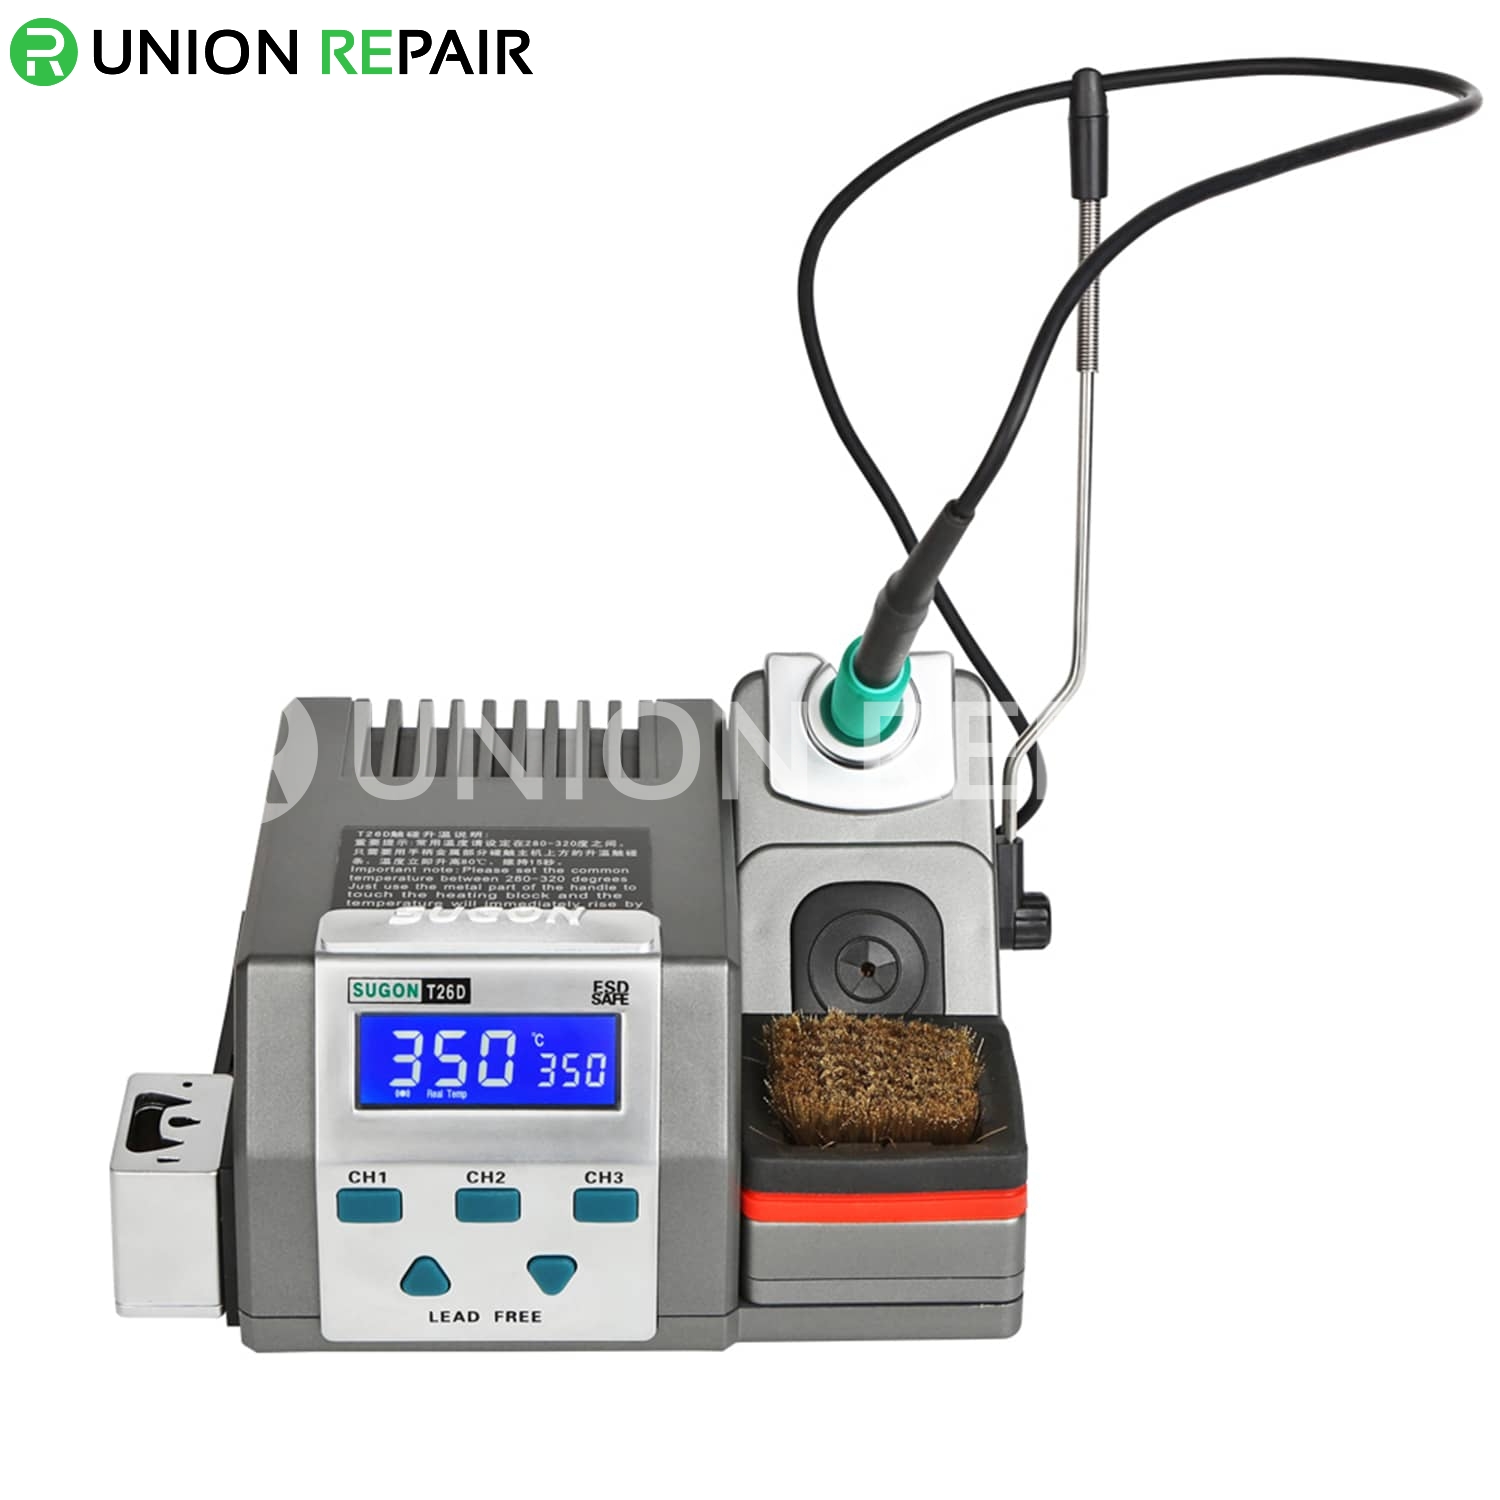 https://images.unionrepair.com/images/watermarked/1/detailed/48/20143-sugon-t26d-precision-soldering-station-suitable-for-jbc-soldering-tip-05.jpg?t=1701254766